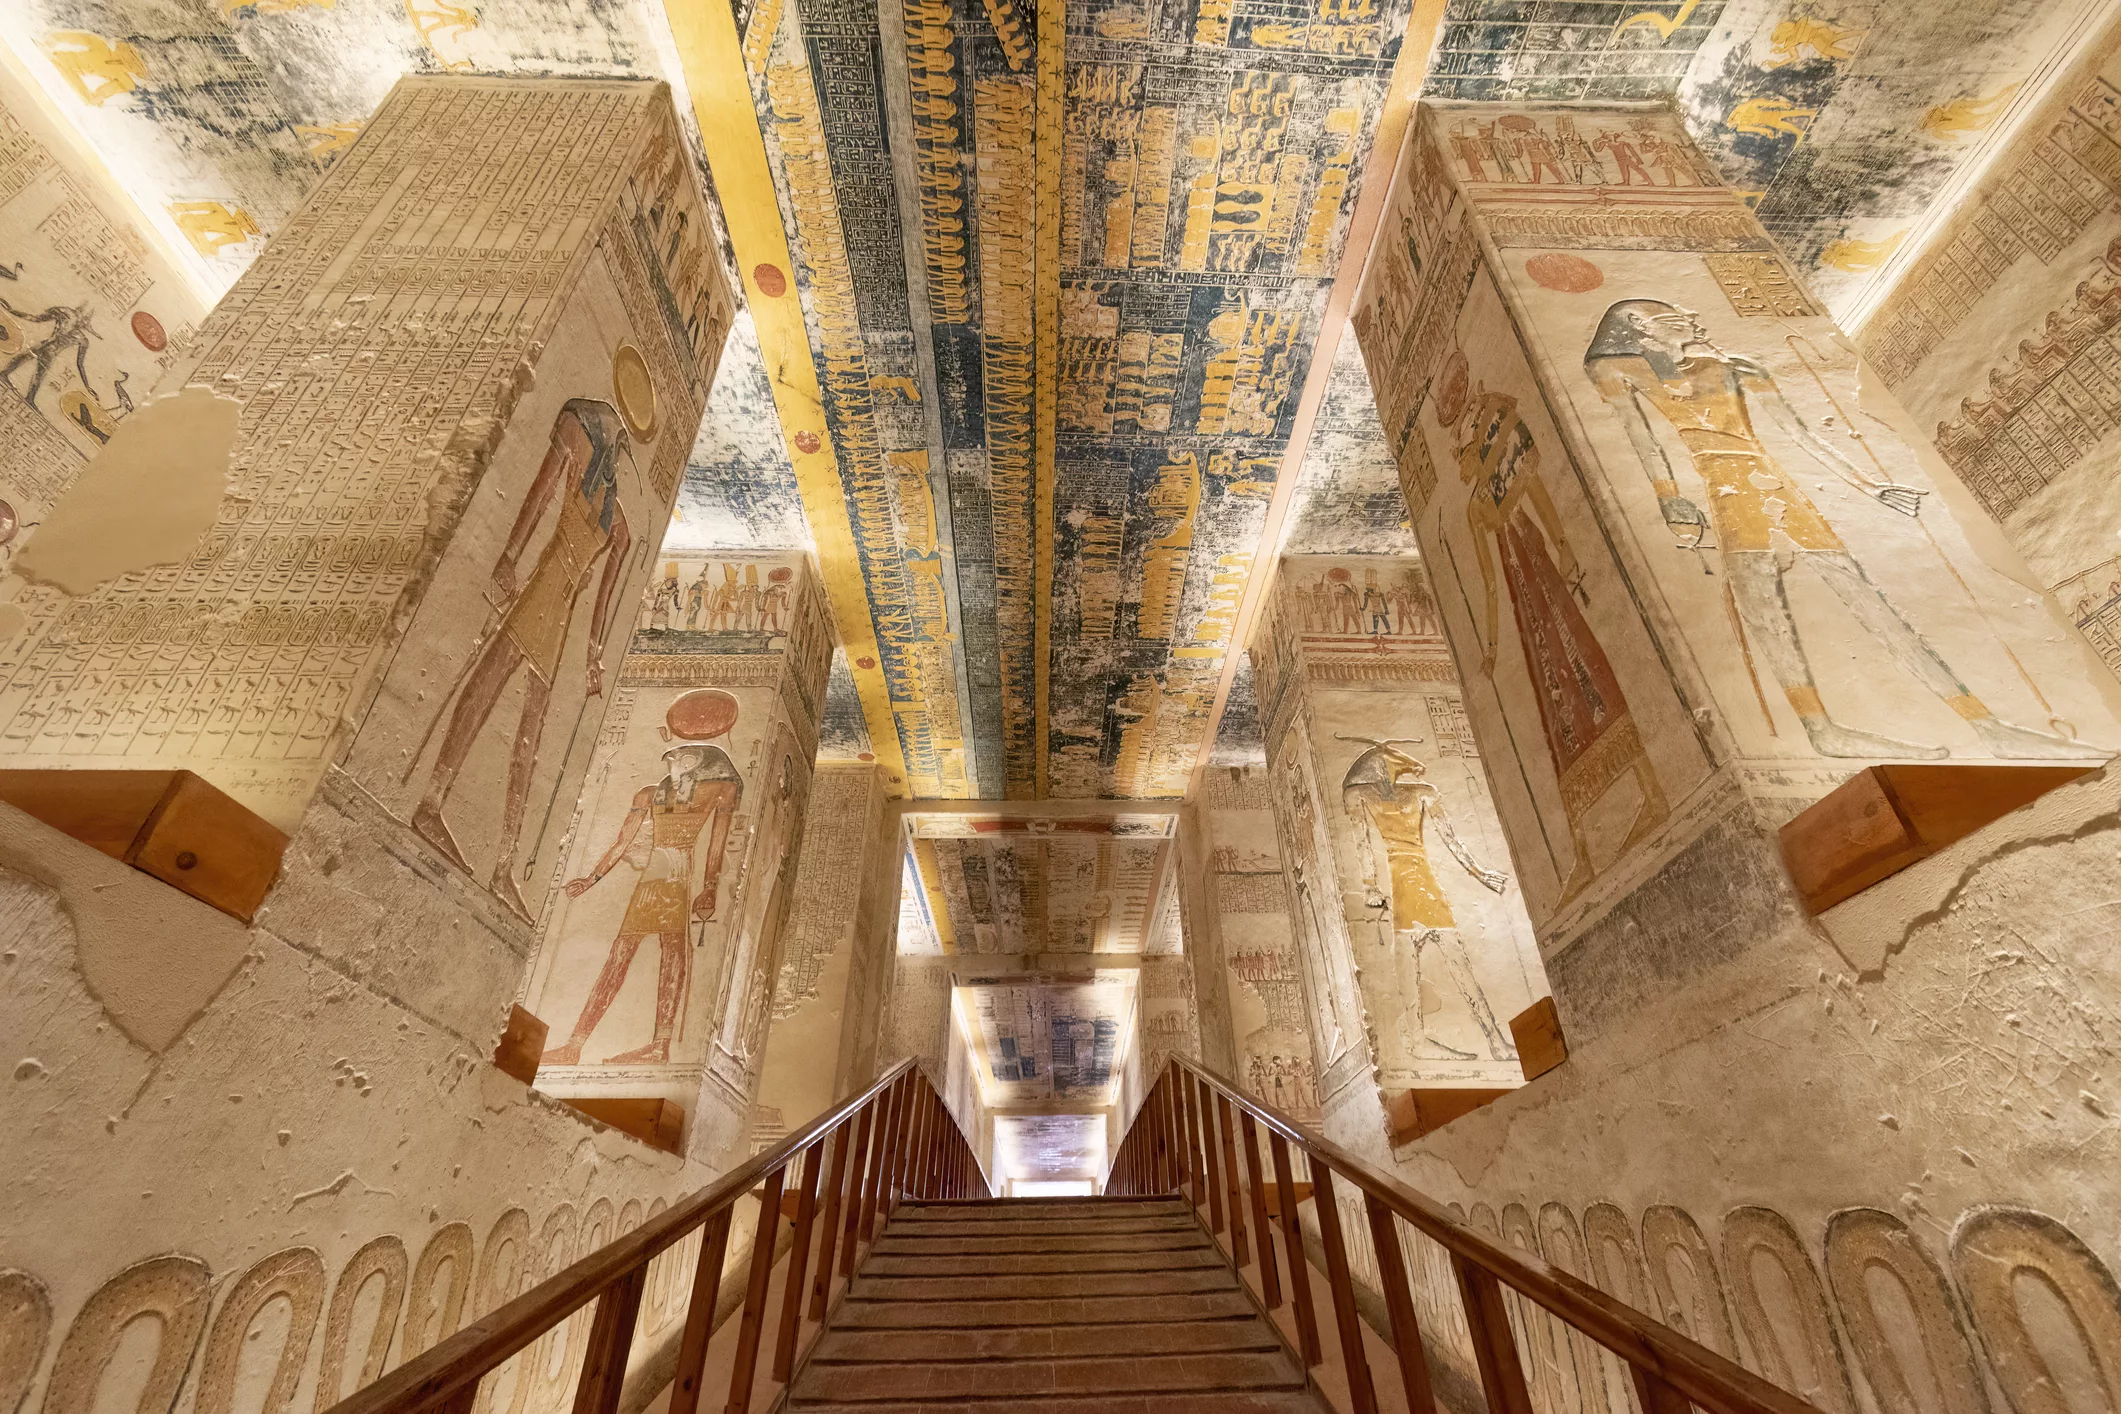 A view from inside the Valley of the Kings in Egypt